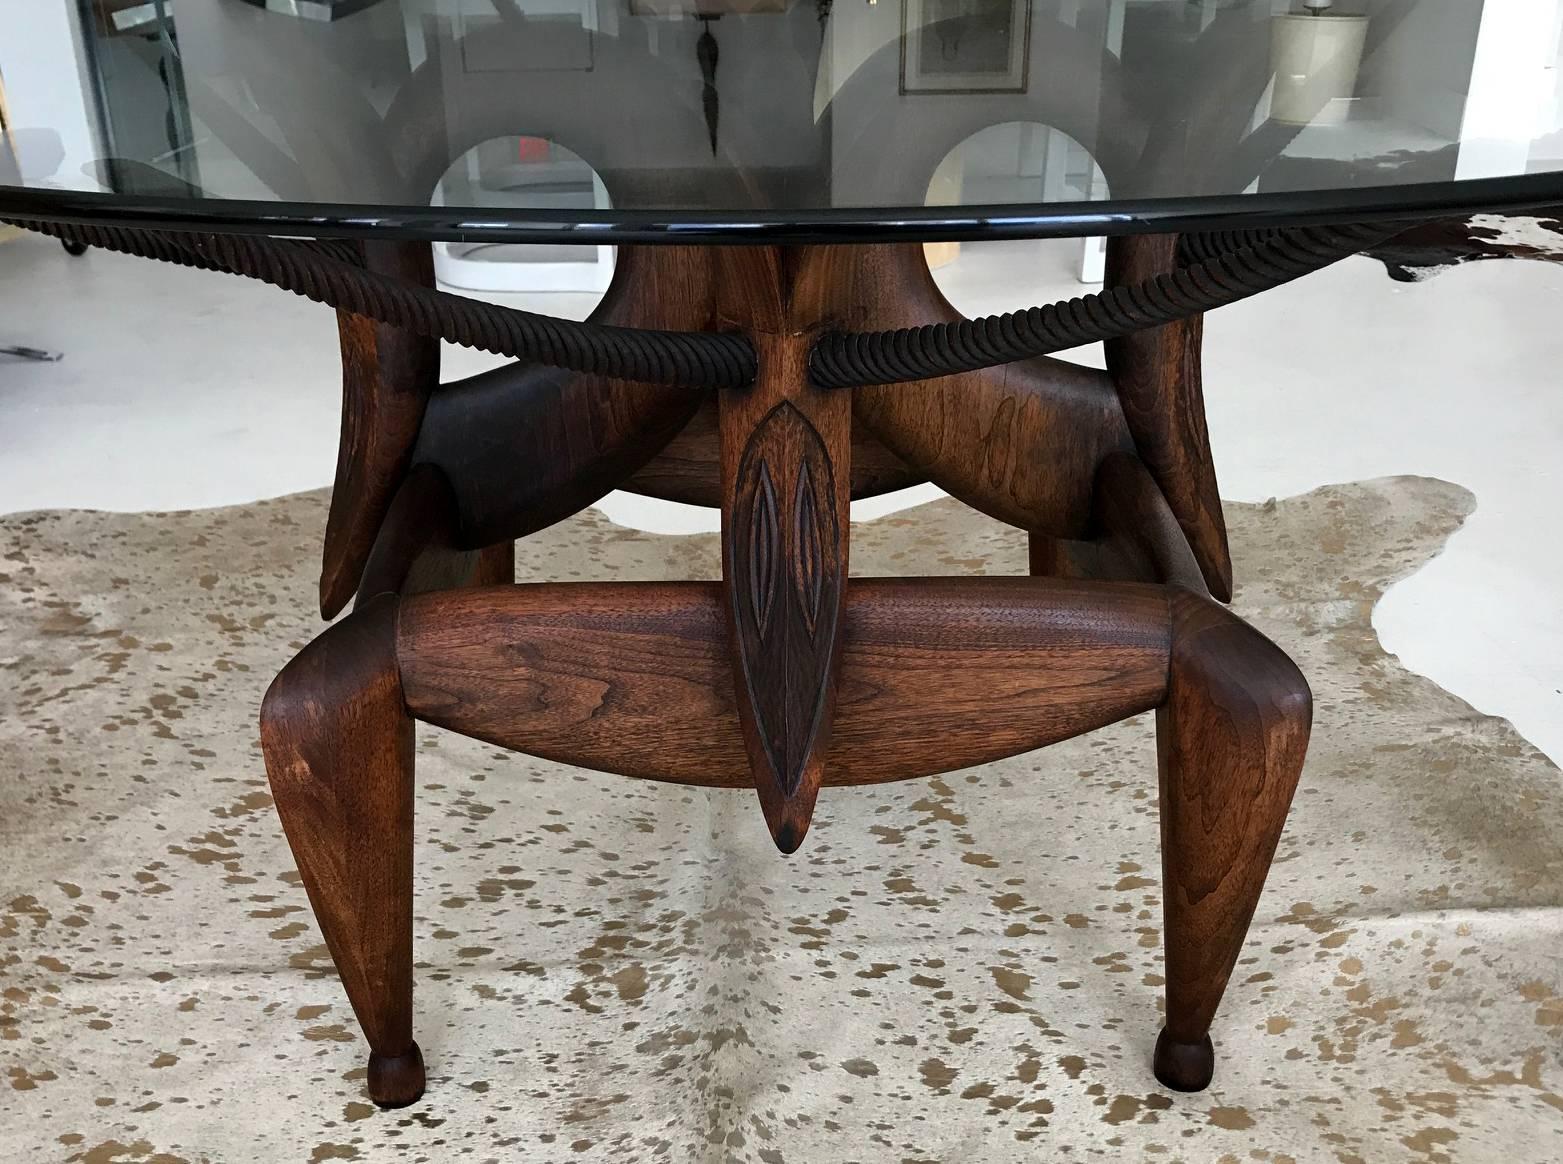 American Craftsman A Most Beautiful Carved Table by Judy McKie with Drawing For Sale